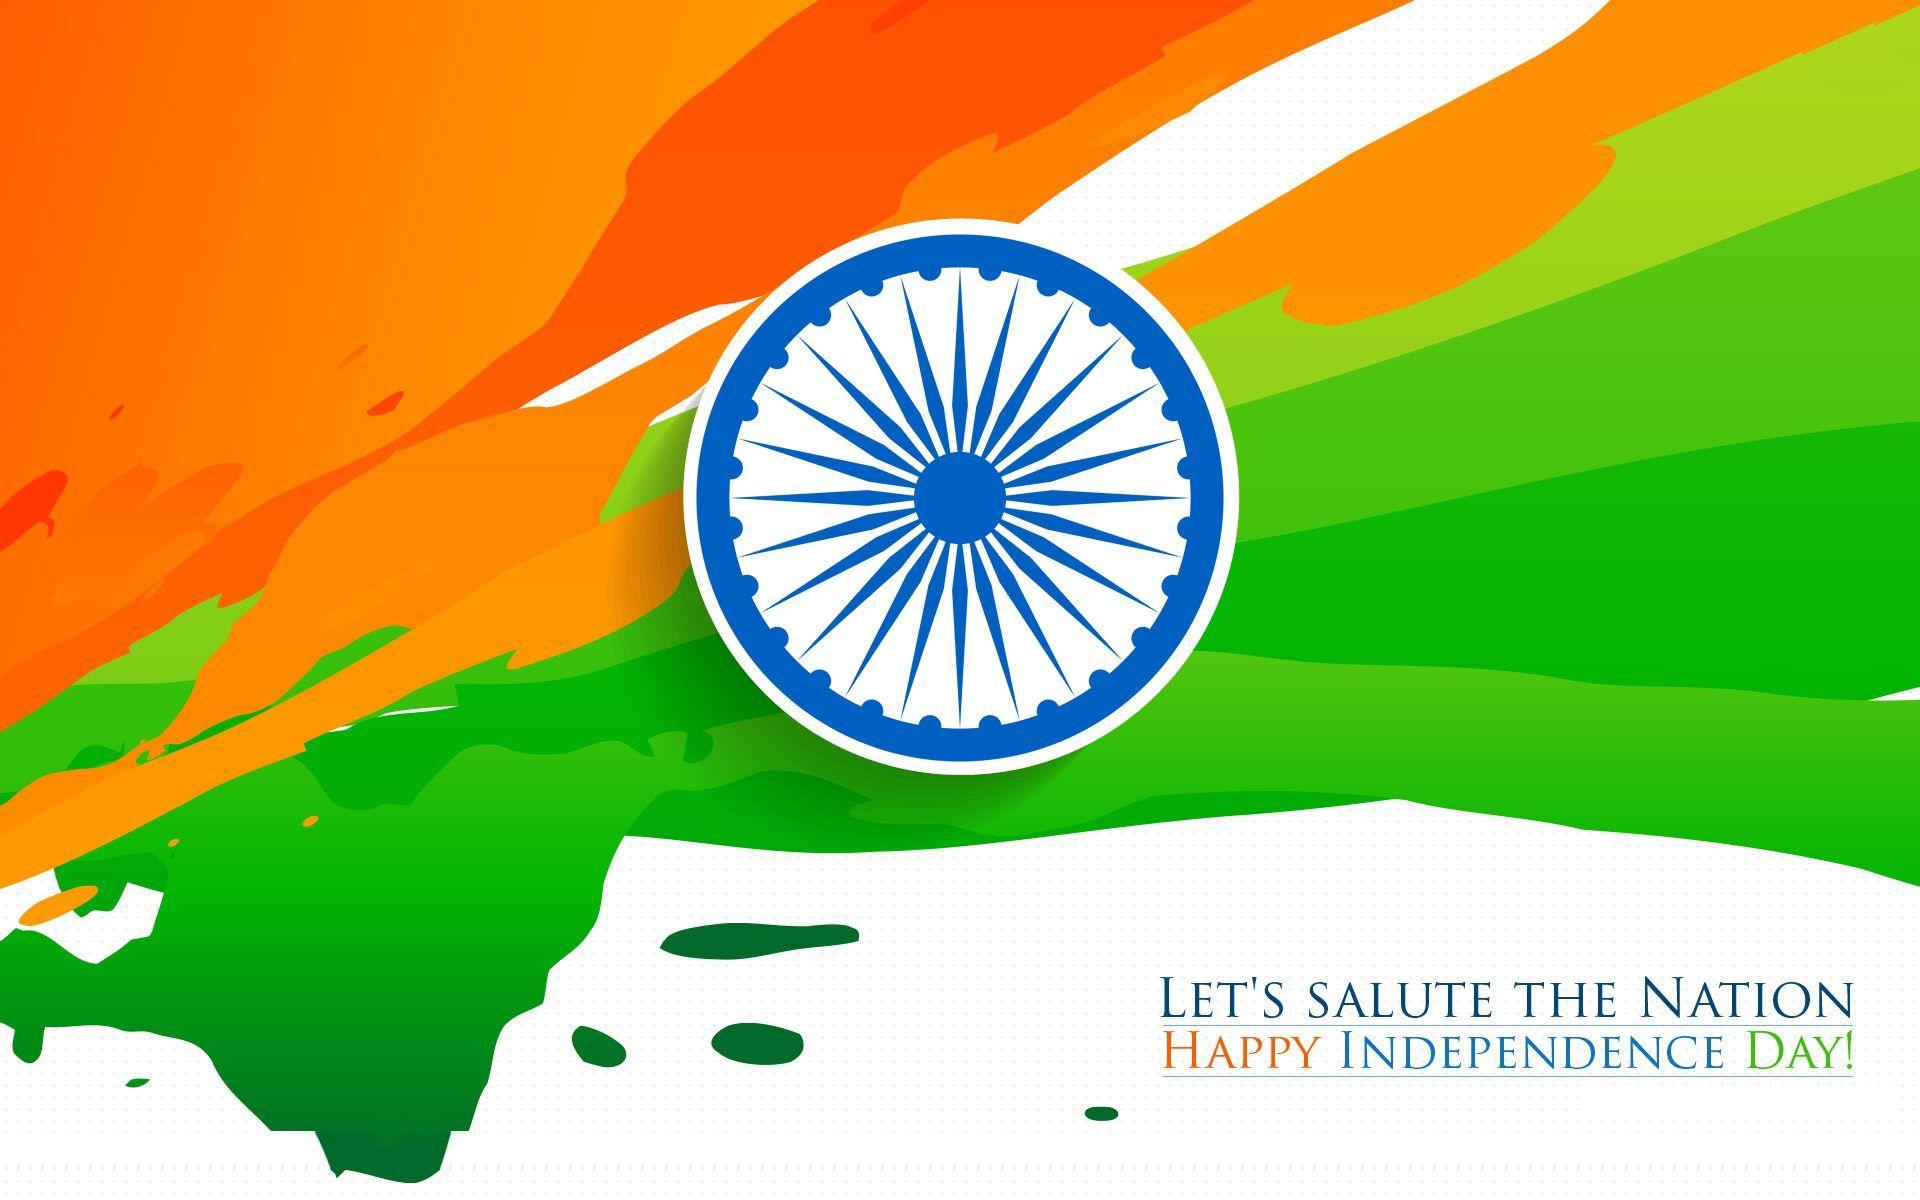 Happy Independence Day India Wallpaper HD Download